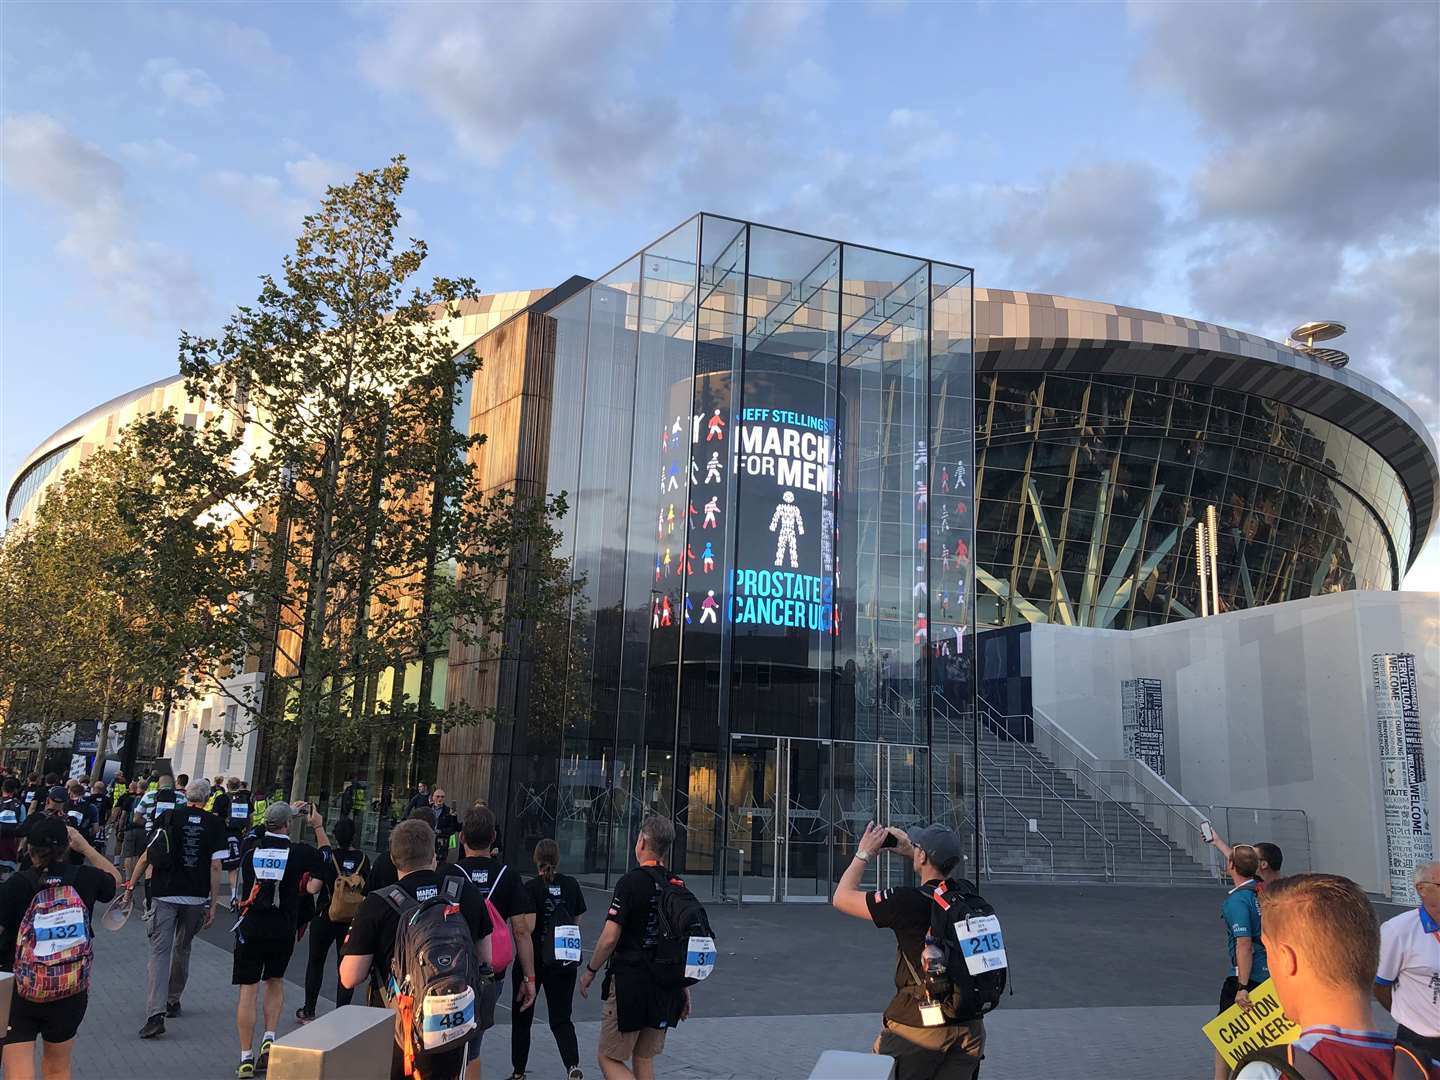 The Tottenham Hotspur Stadium lit up for March for Men. Photo: Justin Foote.